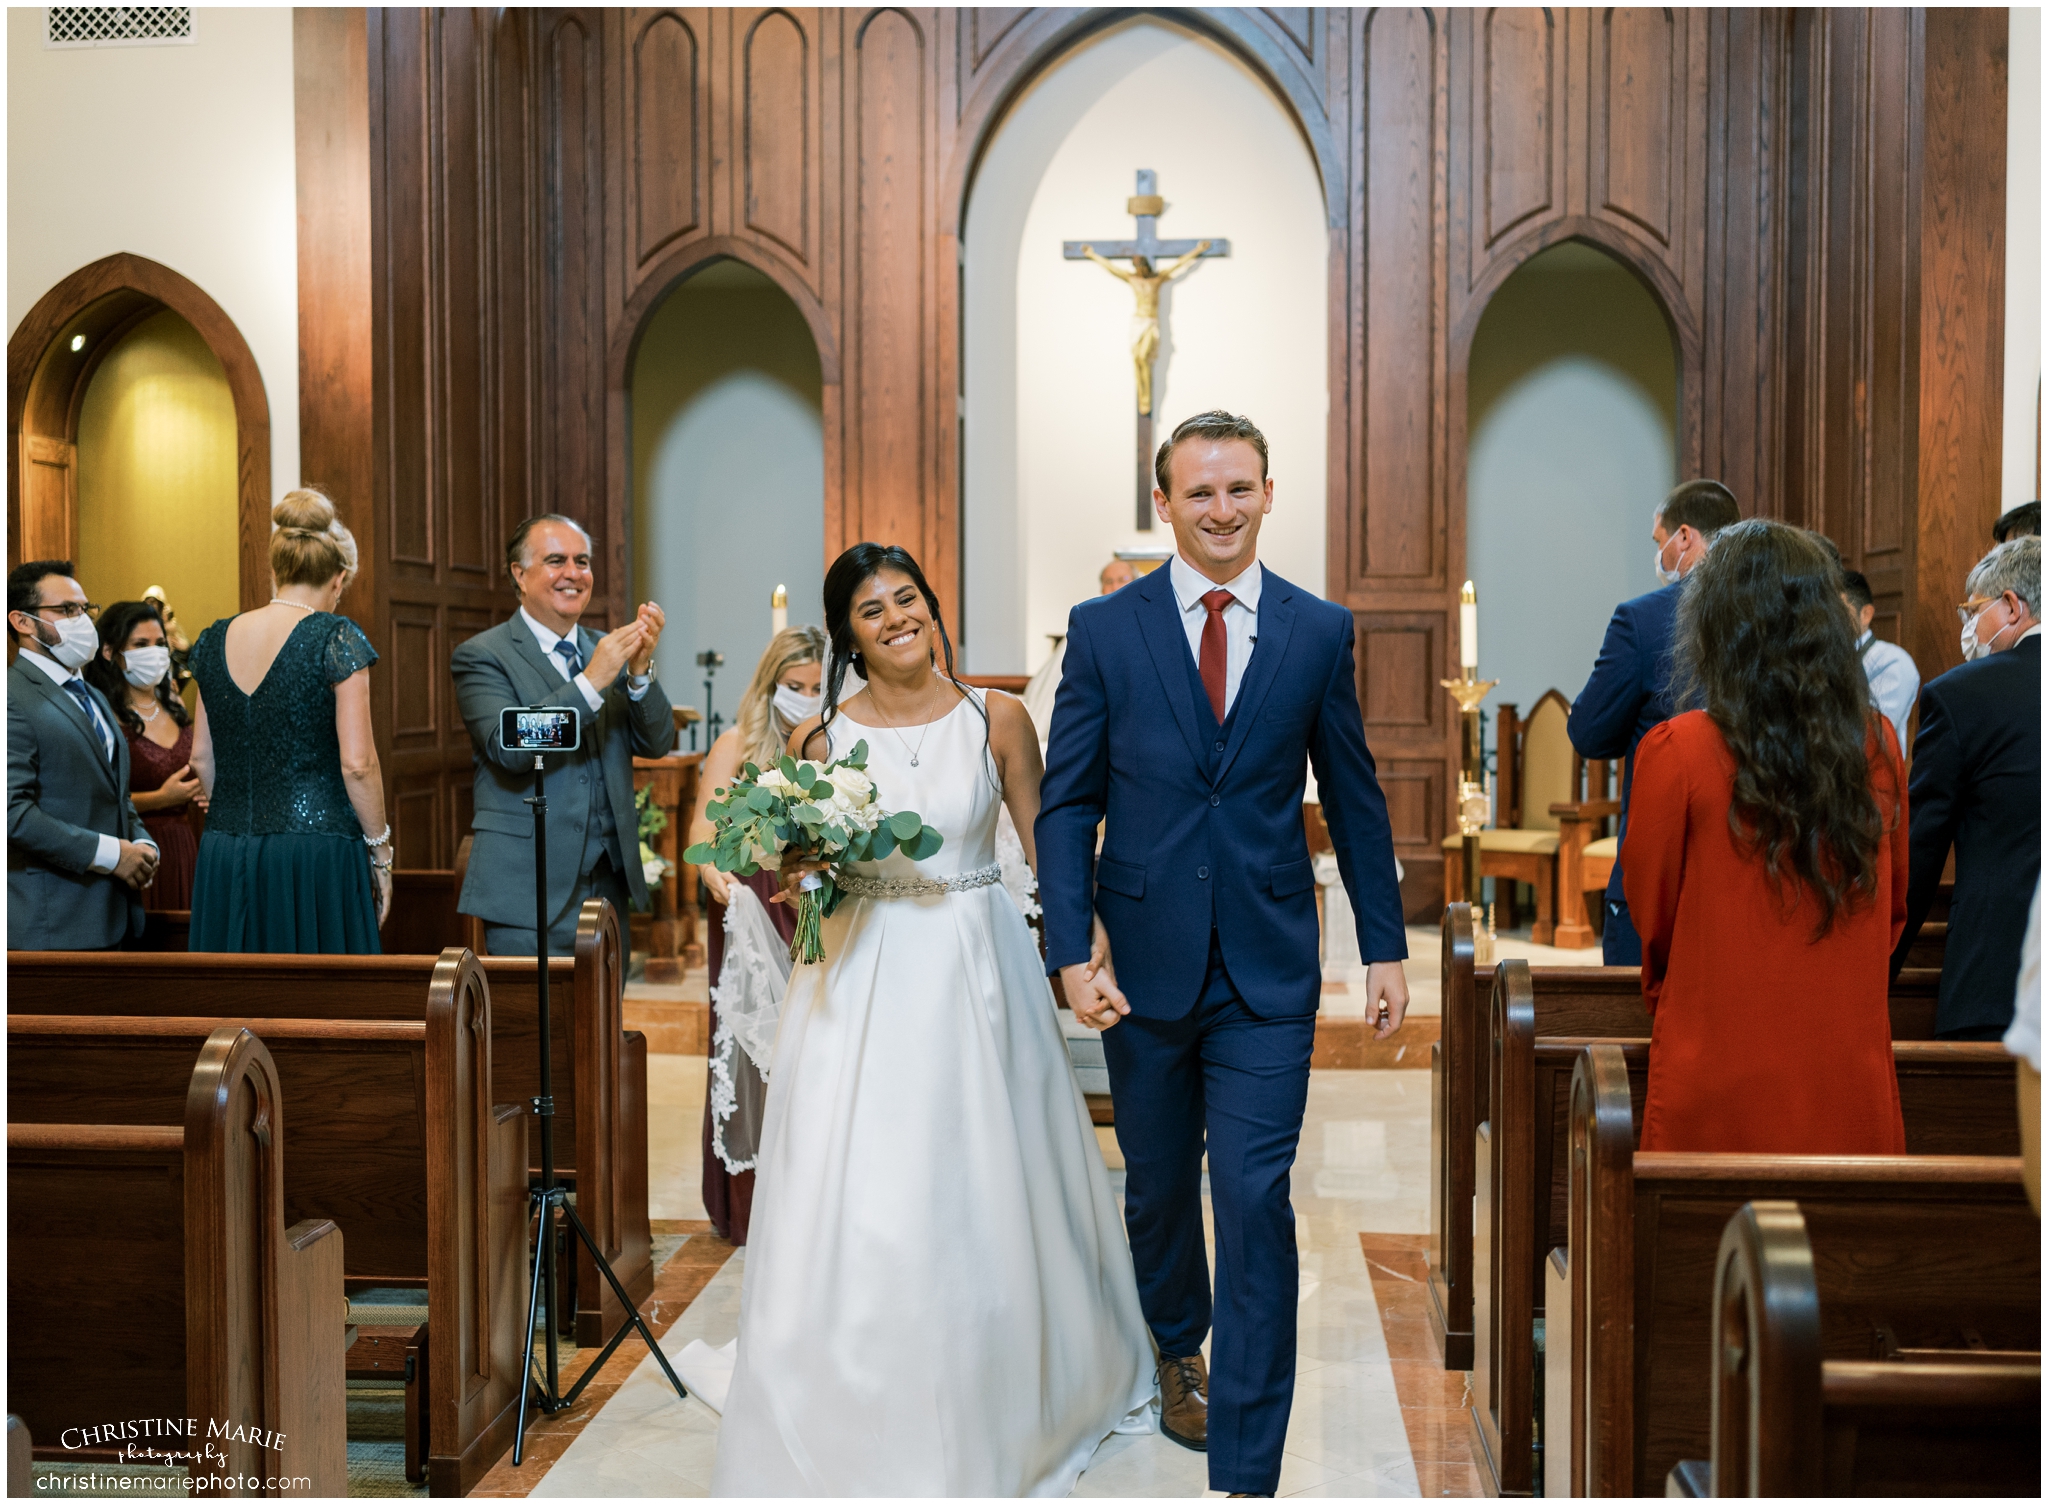 Bride and groom just married at St. Brendans Catholic Church